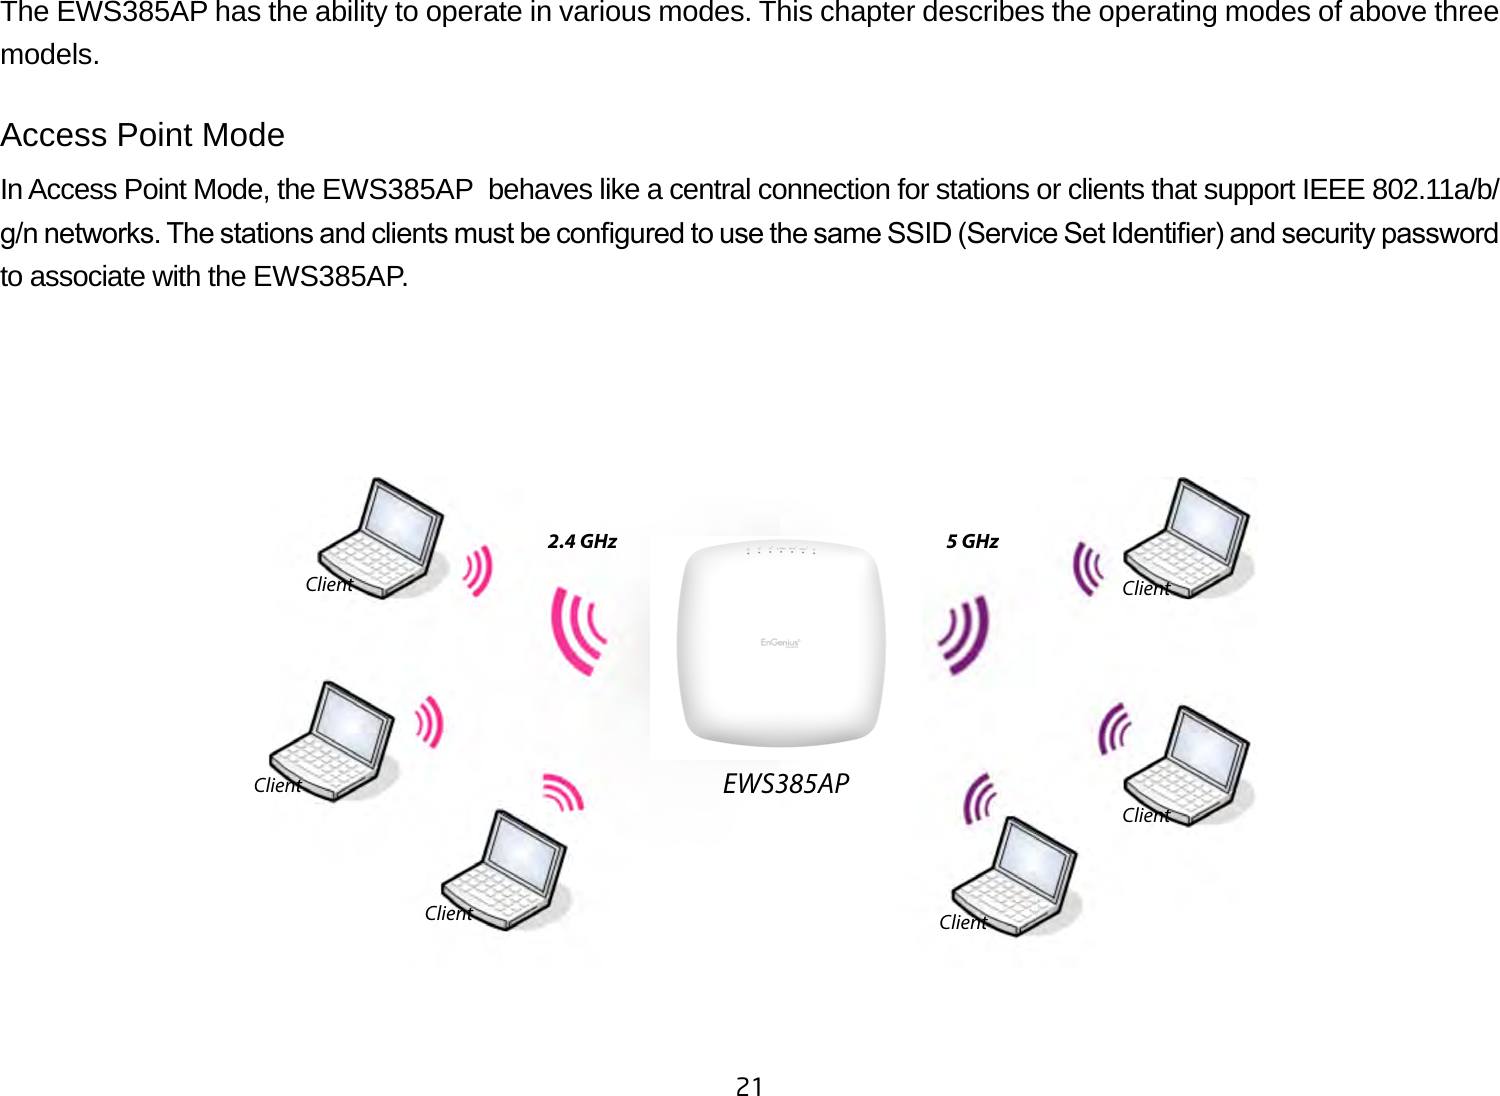 21 The EWS385AP has the ability to operate in various modes. This chapter describes the operating modes of above three models.Access Point ModeIn Access Point Mode, the EWS385AP  behaves like a central connection for stations or clients that support IEEE 802.11a/b/g/n networks. The stations and clients must be congured to use the same SSID (Service Set Identier) and security password to associate with the EWS385AP.  EWS385APClientClientClient ClientClientClient2.4 GHz 5 GHz